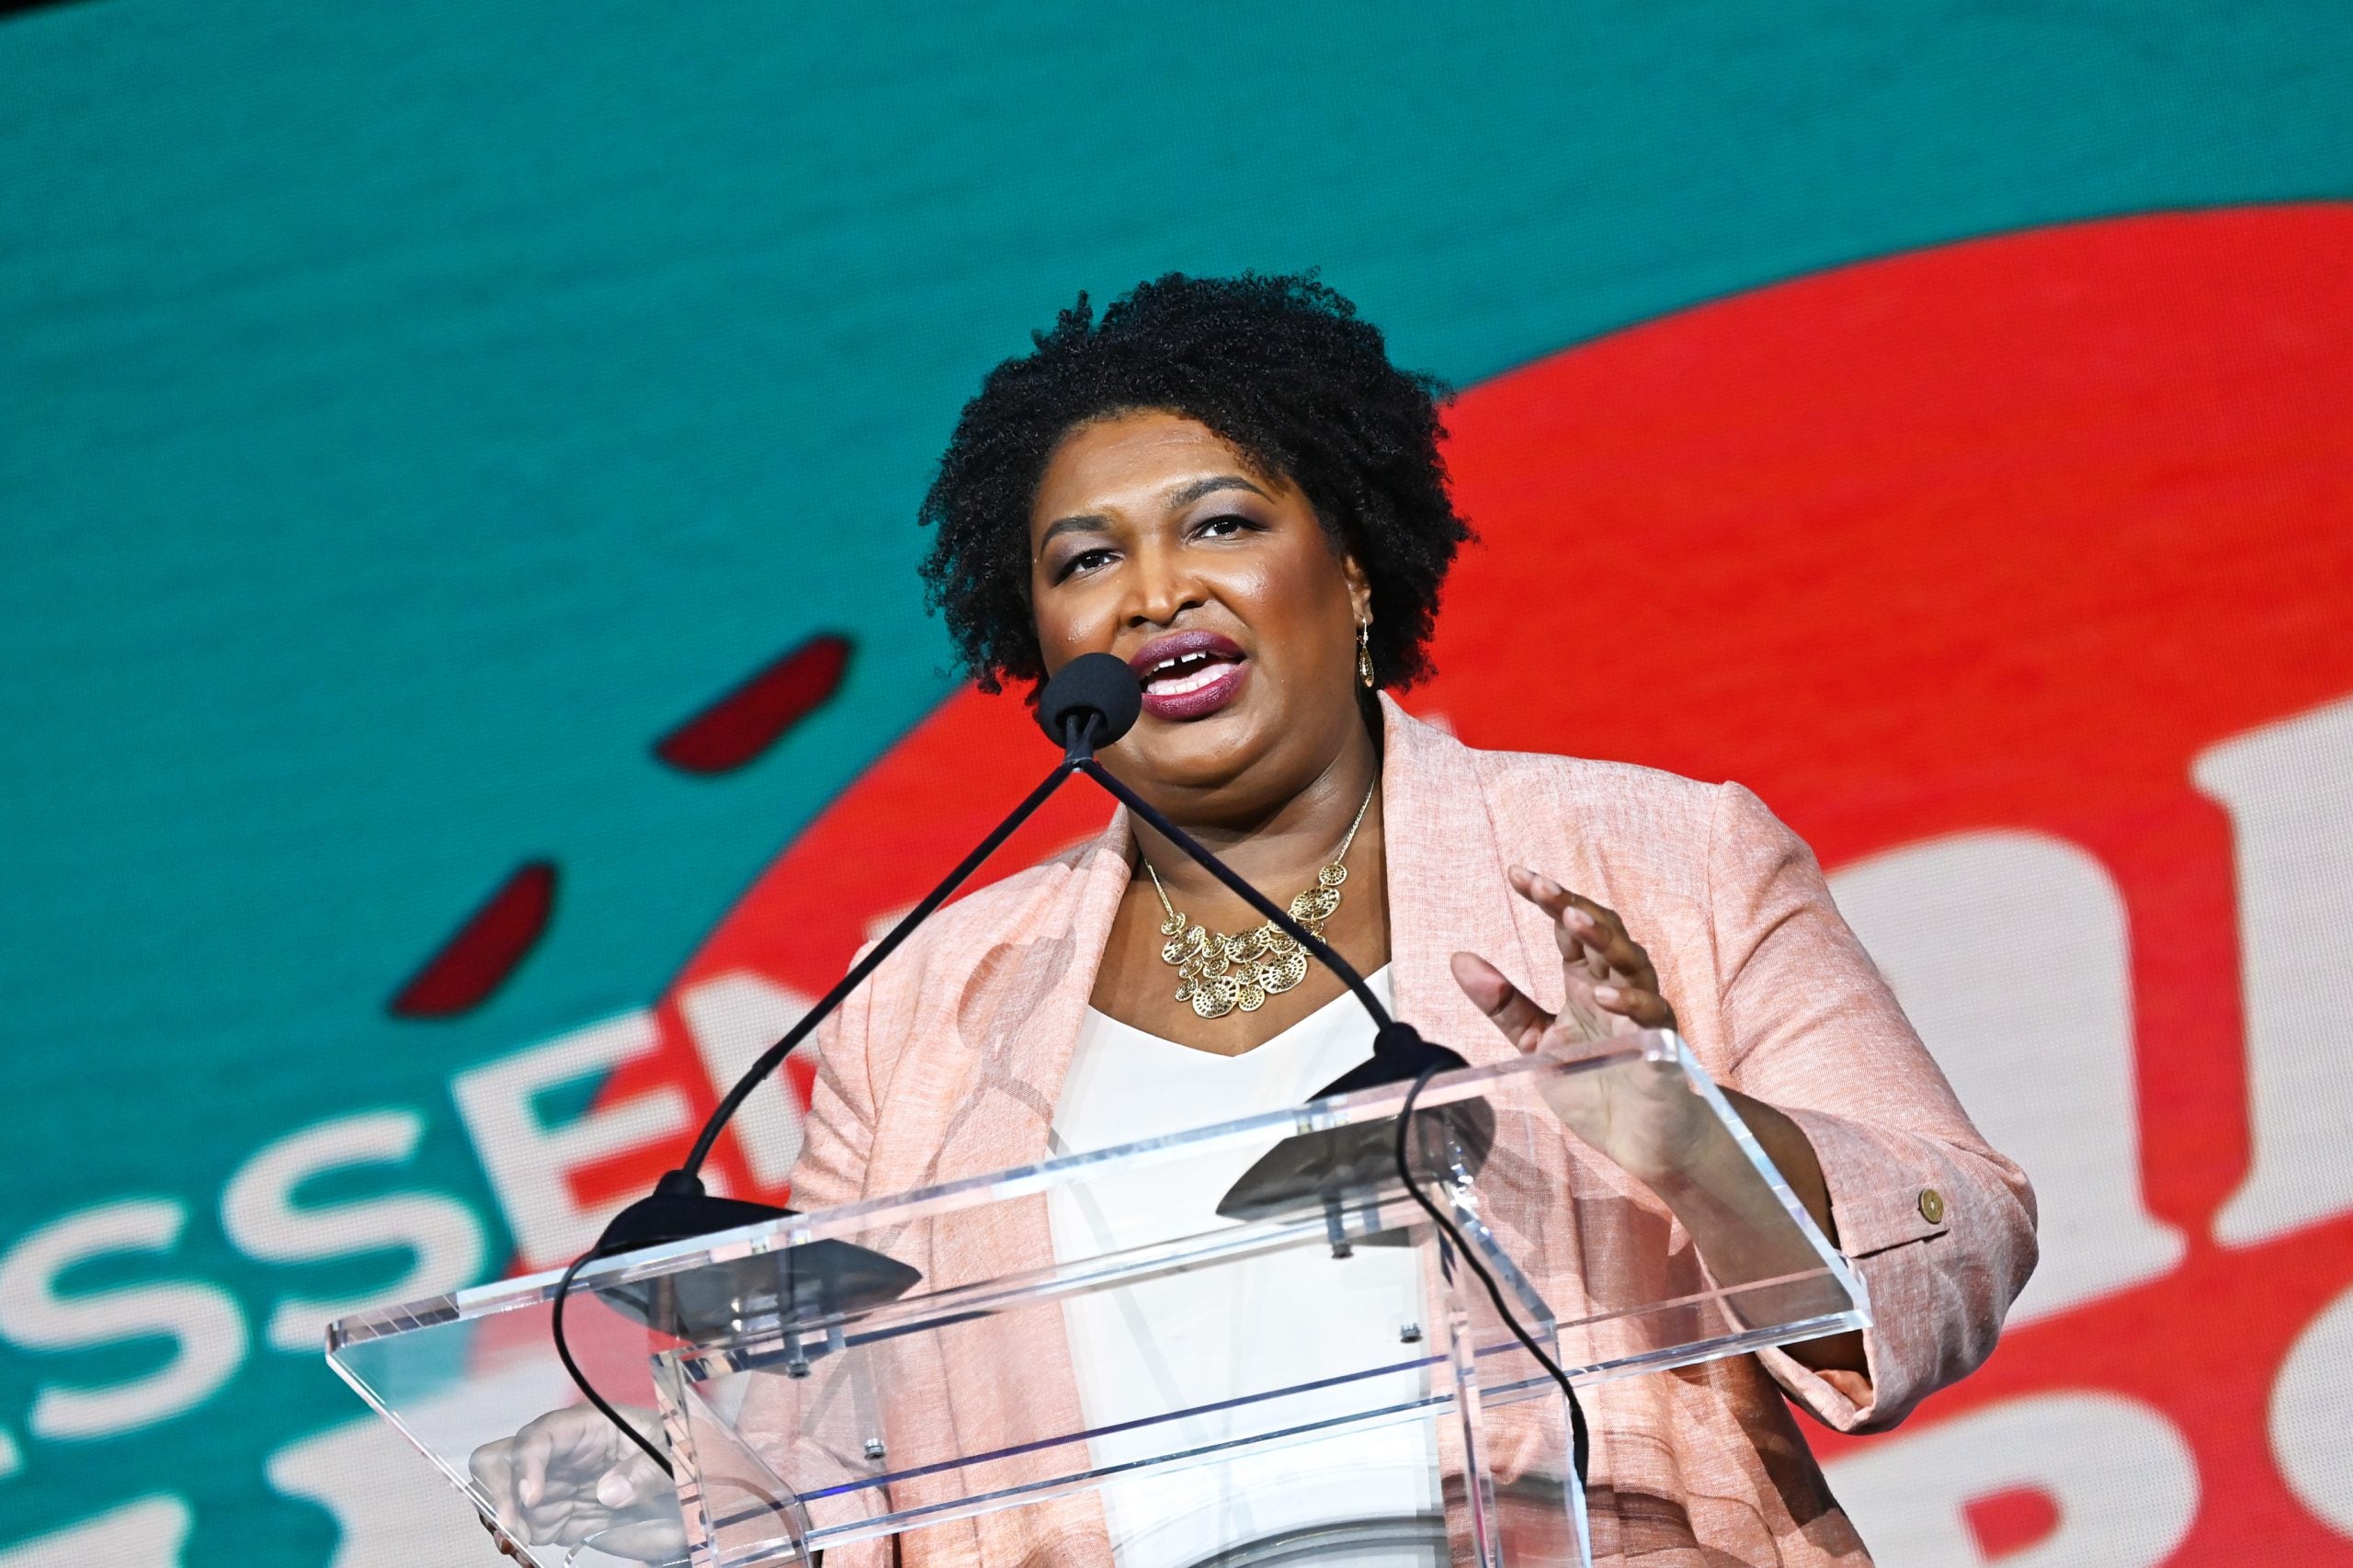 Stacey Abrams: ‘Voting Is Not Magic. It Is Medicine’